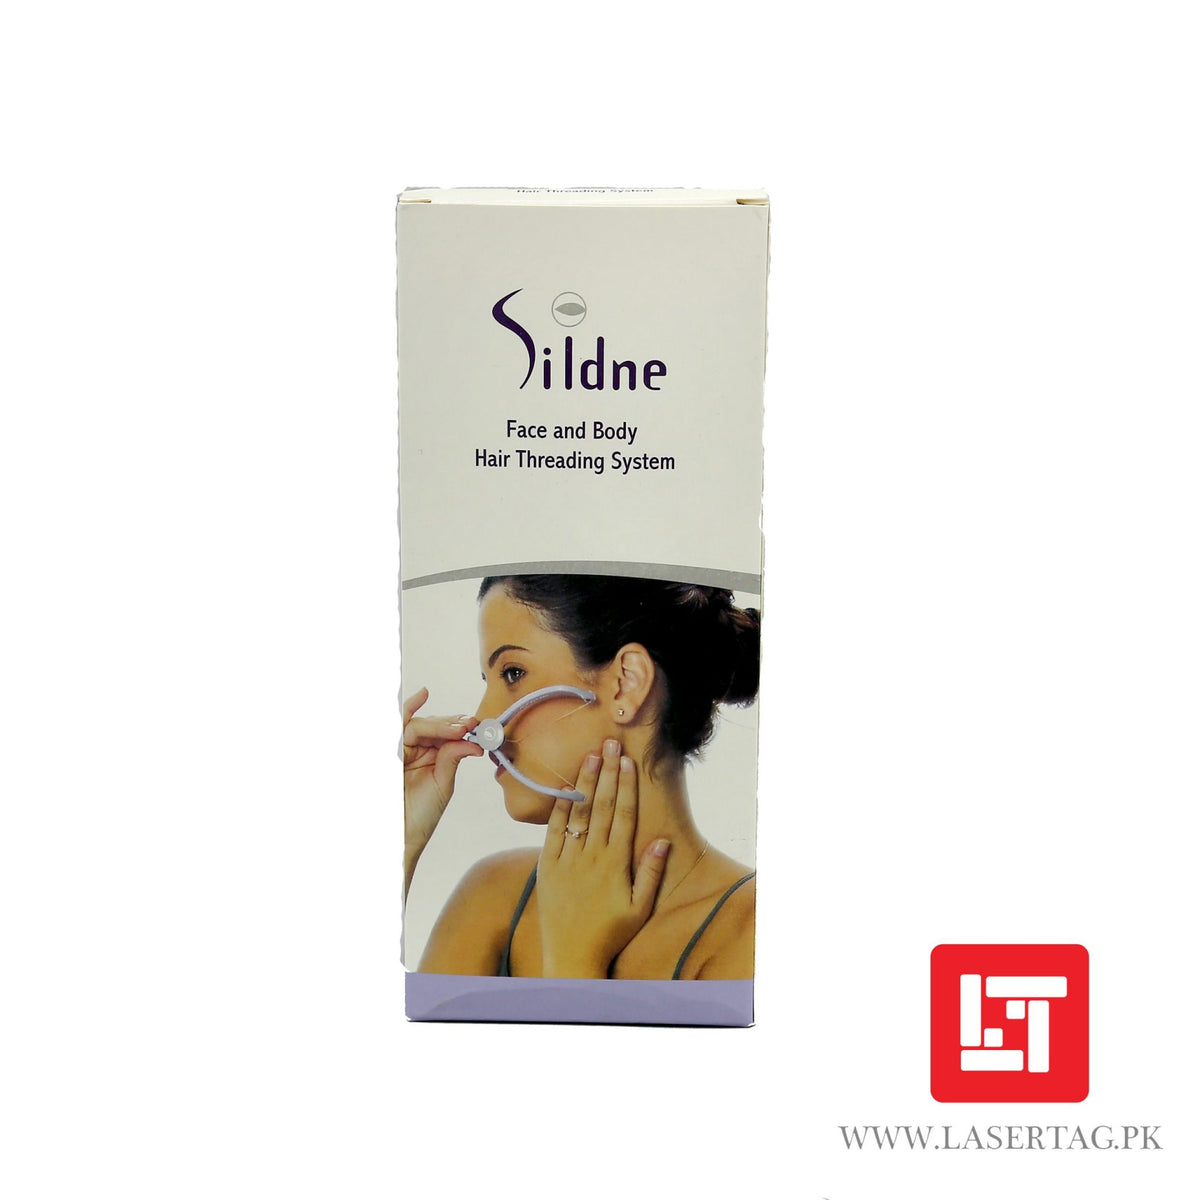 Sildne Face and Body Hair Threading System freeshipping - lasertag.pk